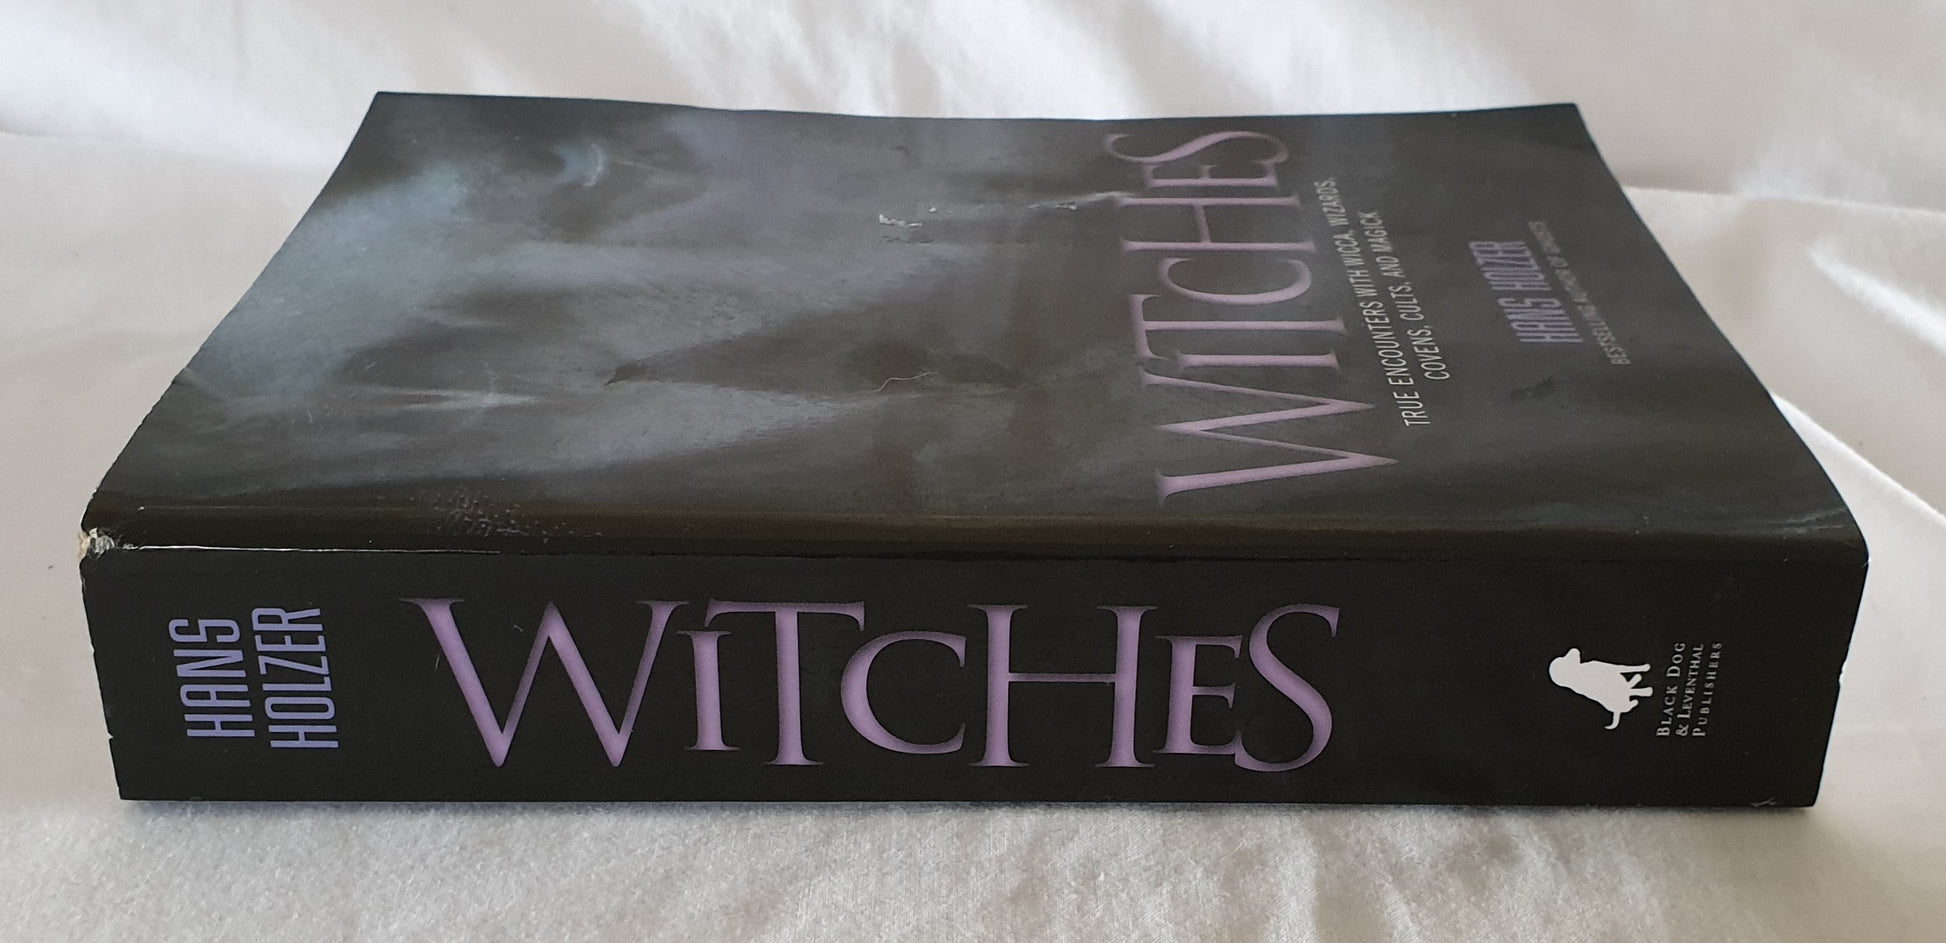 Witches  True Encounters with Wicca, Wizards, Covens, Cults, and Magick  by Hans Holzer